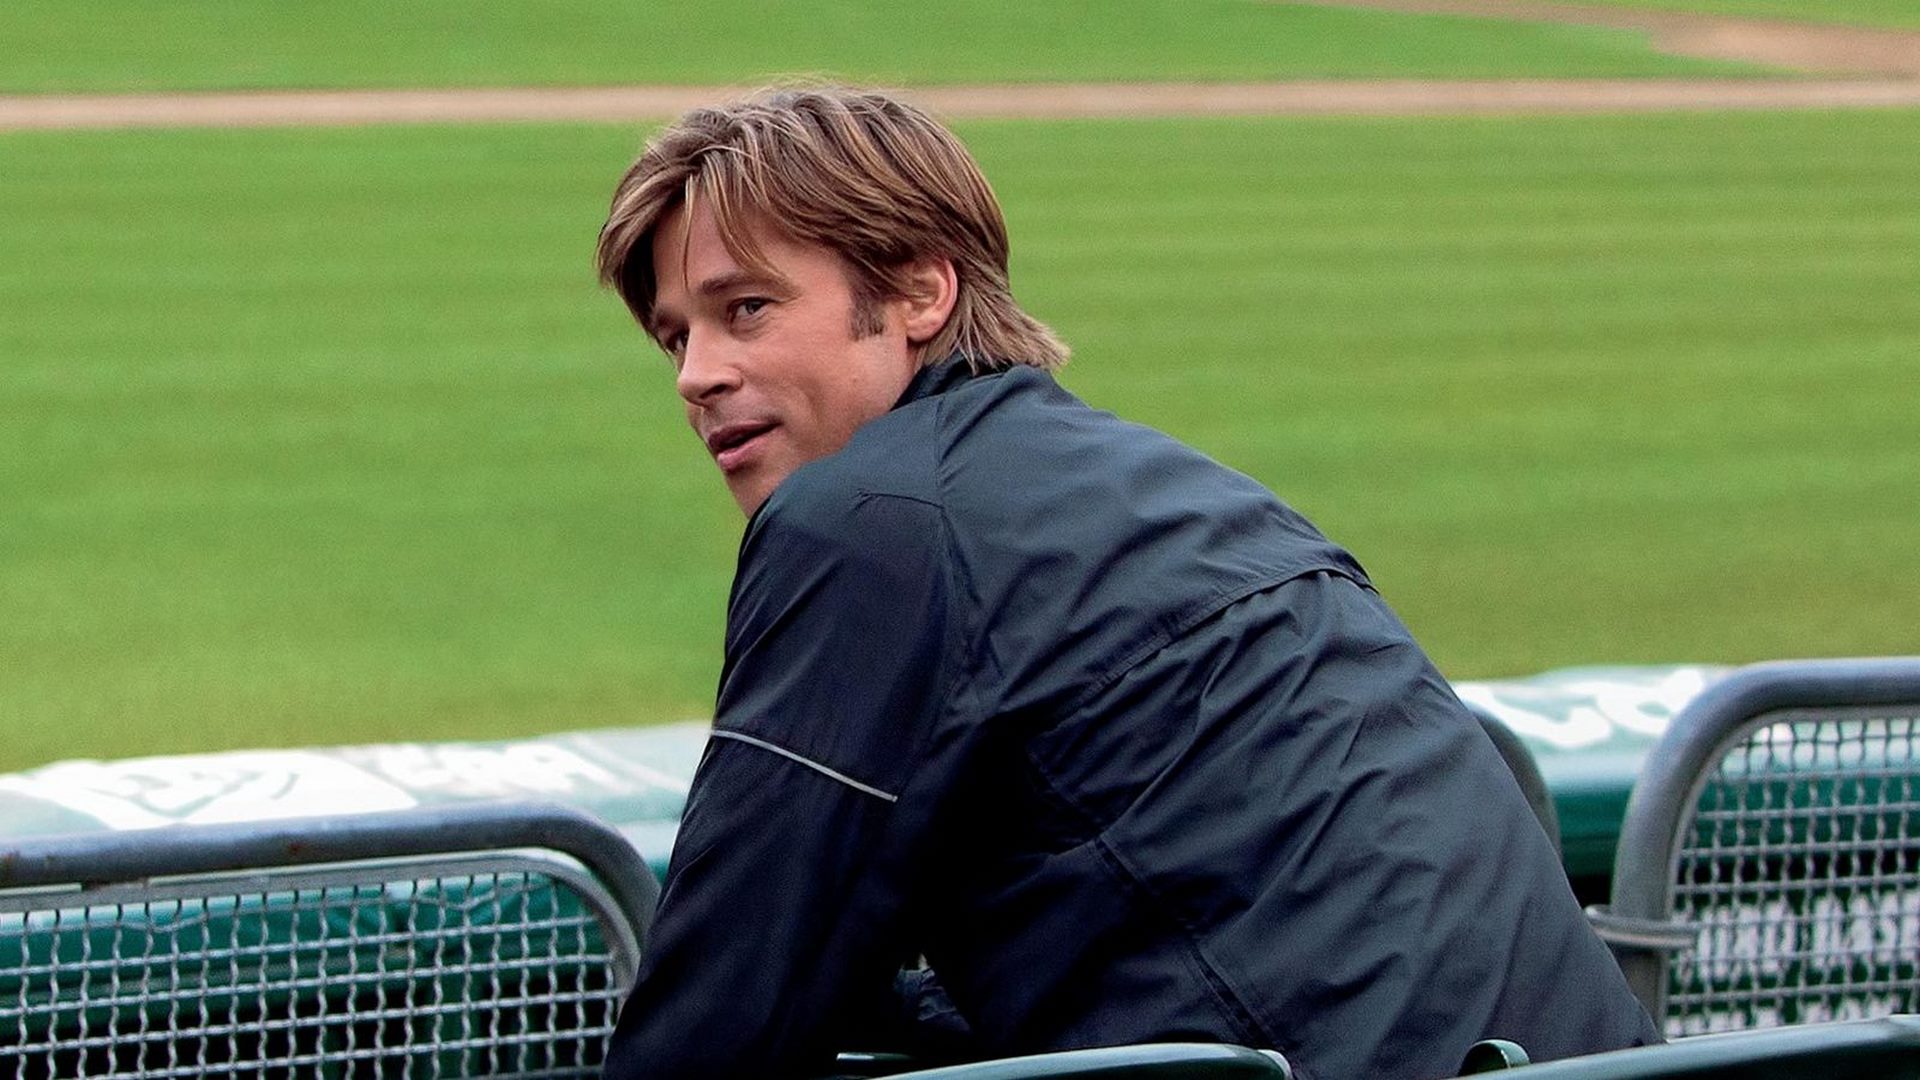 An image of Brad Pitt in the movie Moneyball